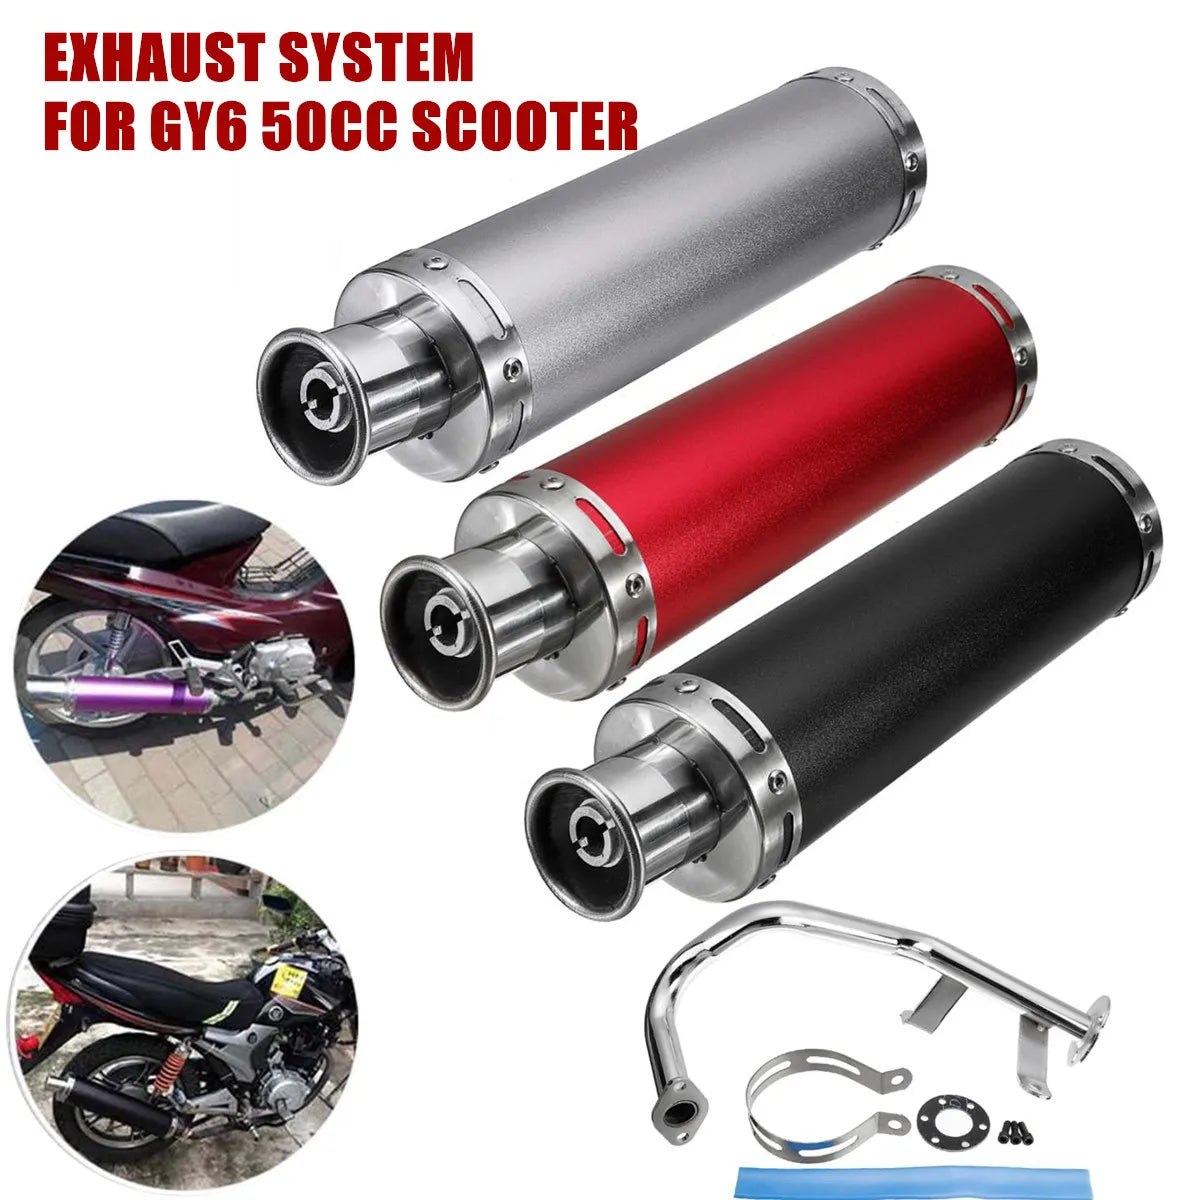 14 Inch Motorcycle Racing Exhaust System Muffler Assembly Stainless steel For GY6 50cc Scooter Dirt Bike